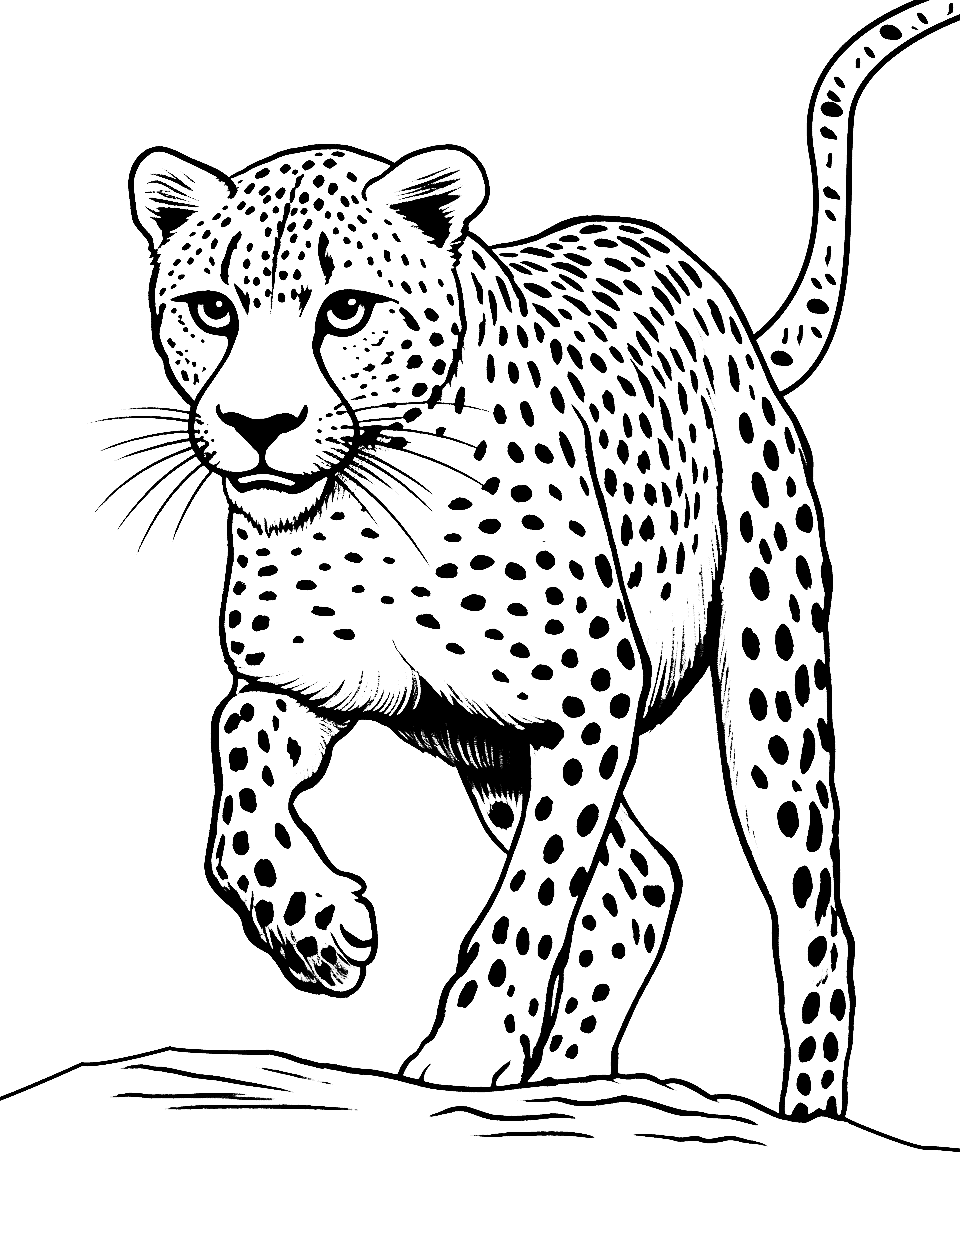 Cheetah Sprinting Coloring Page - A powerful scene of a cheetah sprinting.